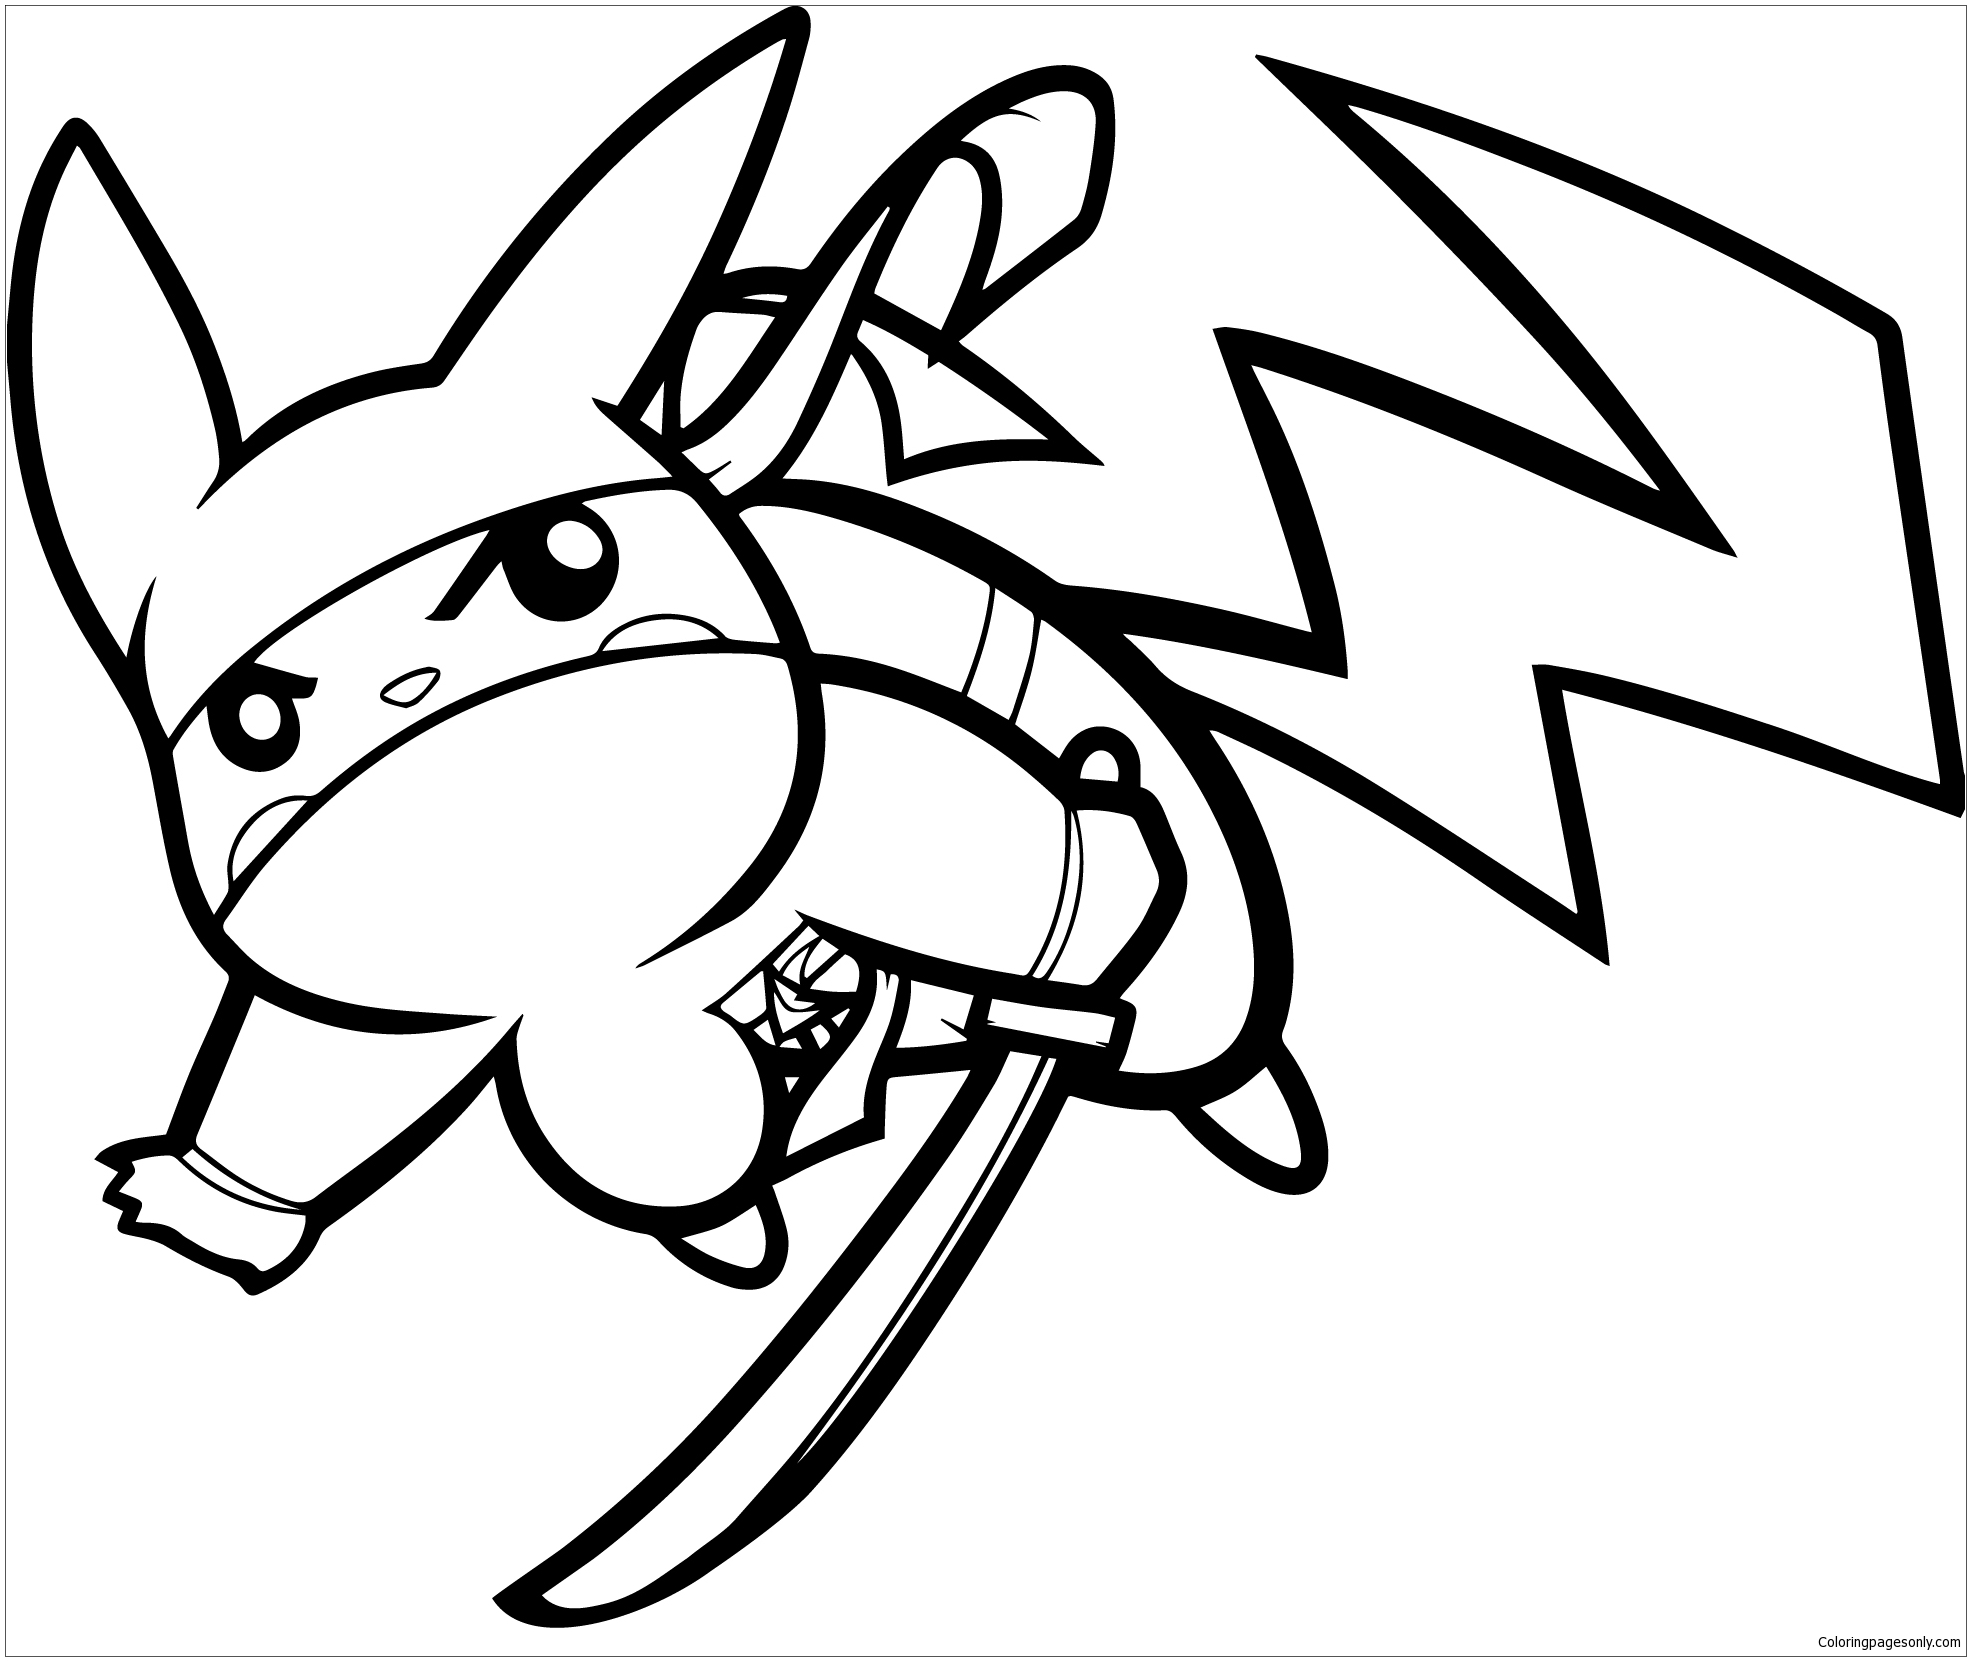 Pikachu Ninja Coloring Page - Free Coloring Pages Online